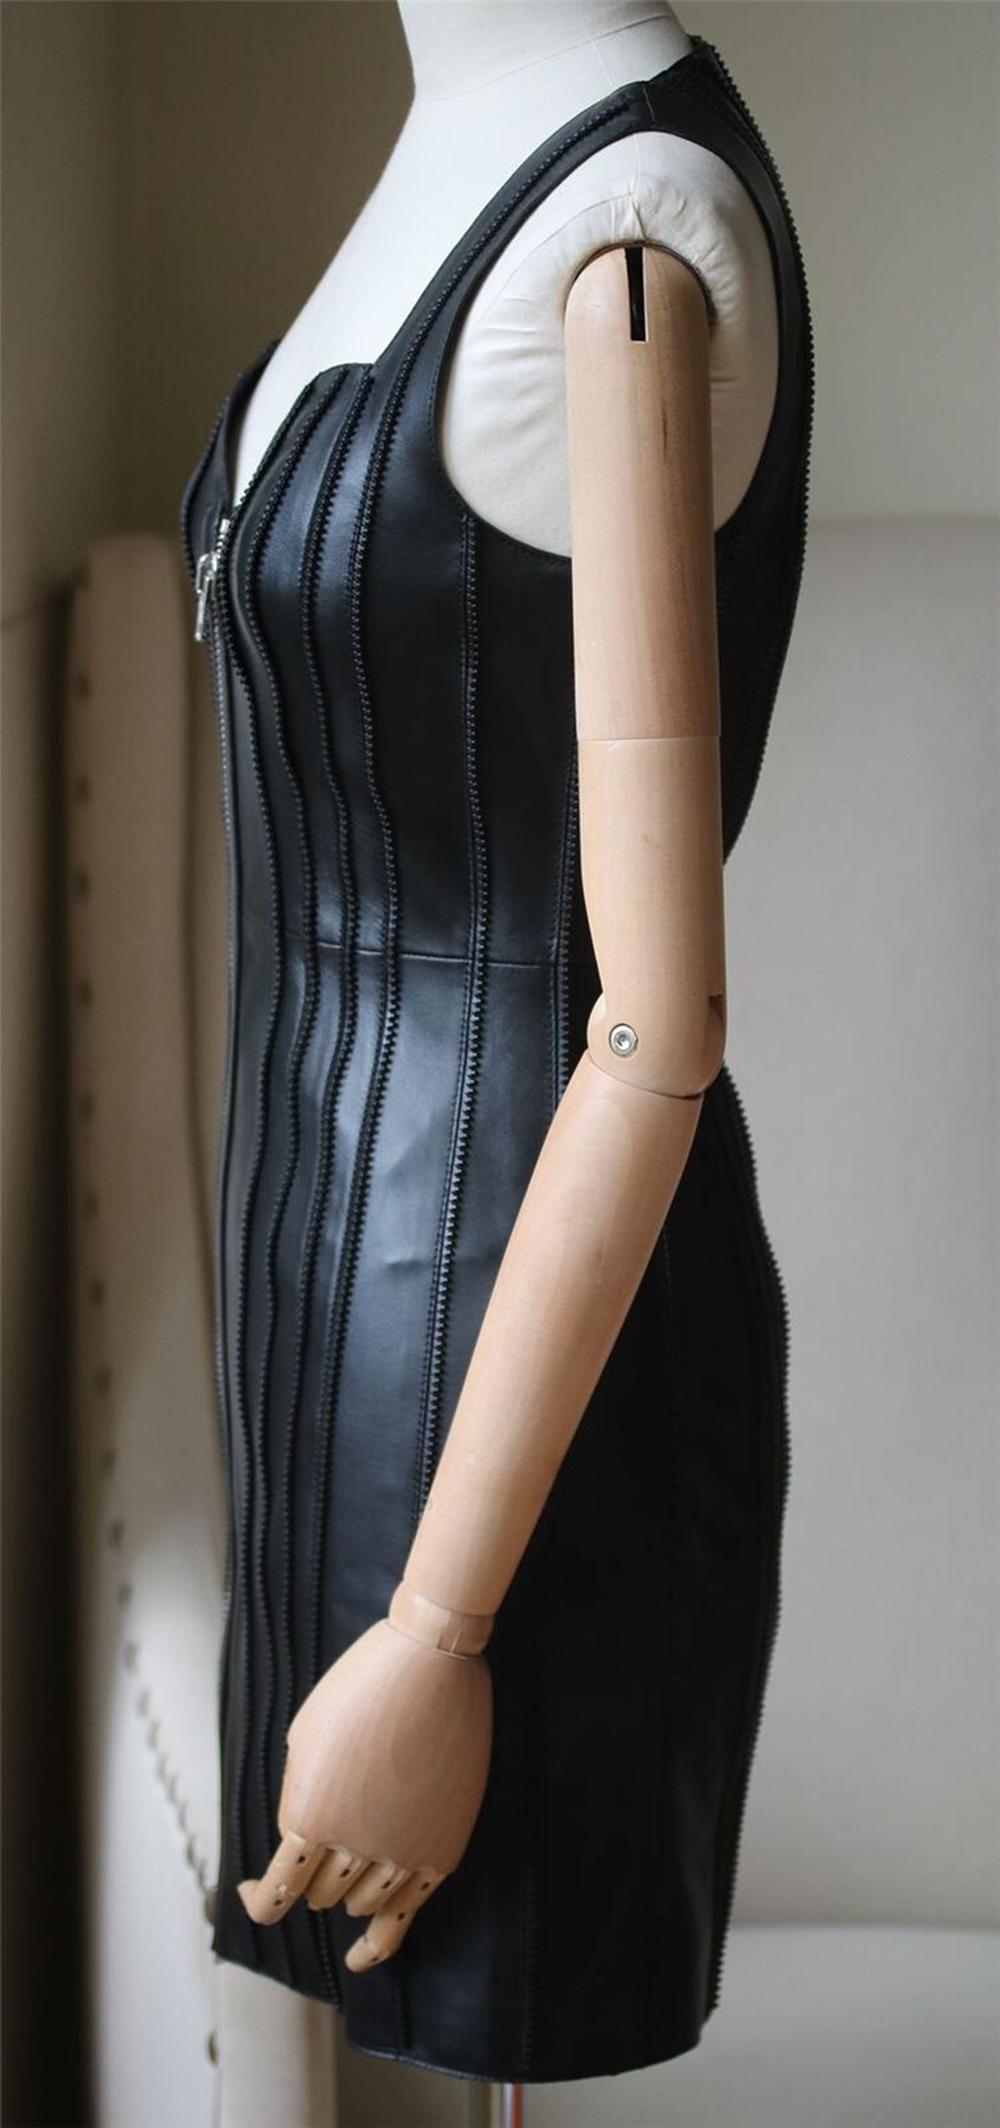 givenchy leather dress